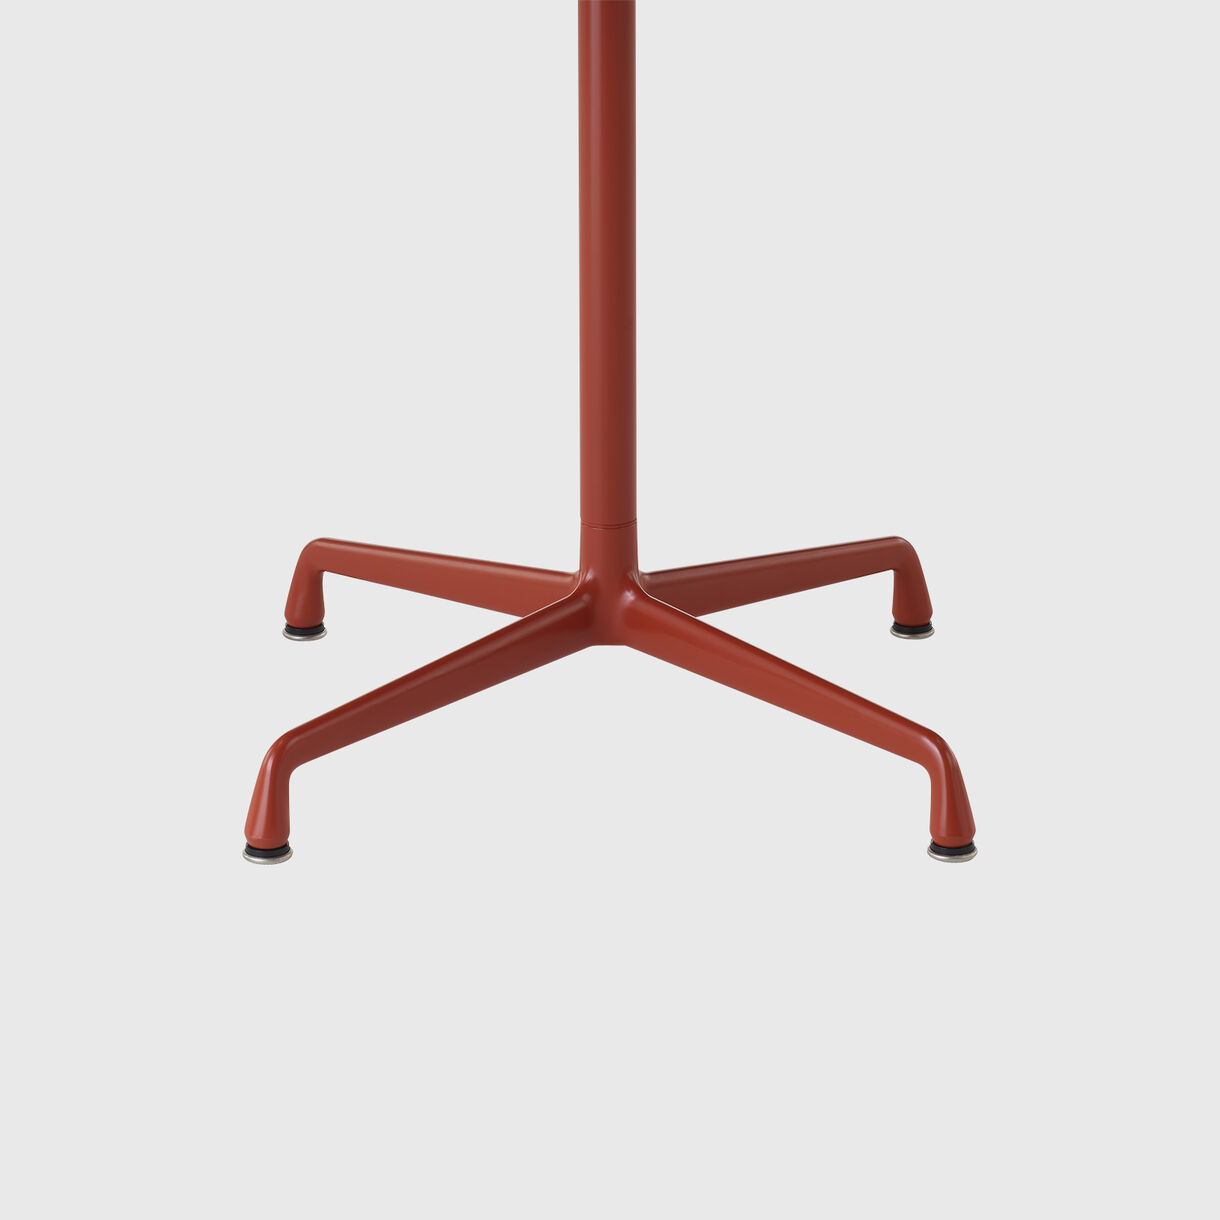 HM x Hay - Eames Table with Universal Base, Iron Red